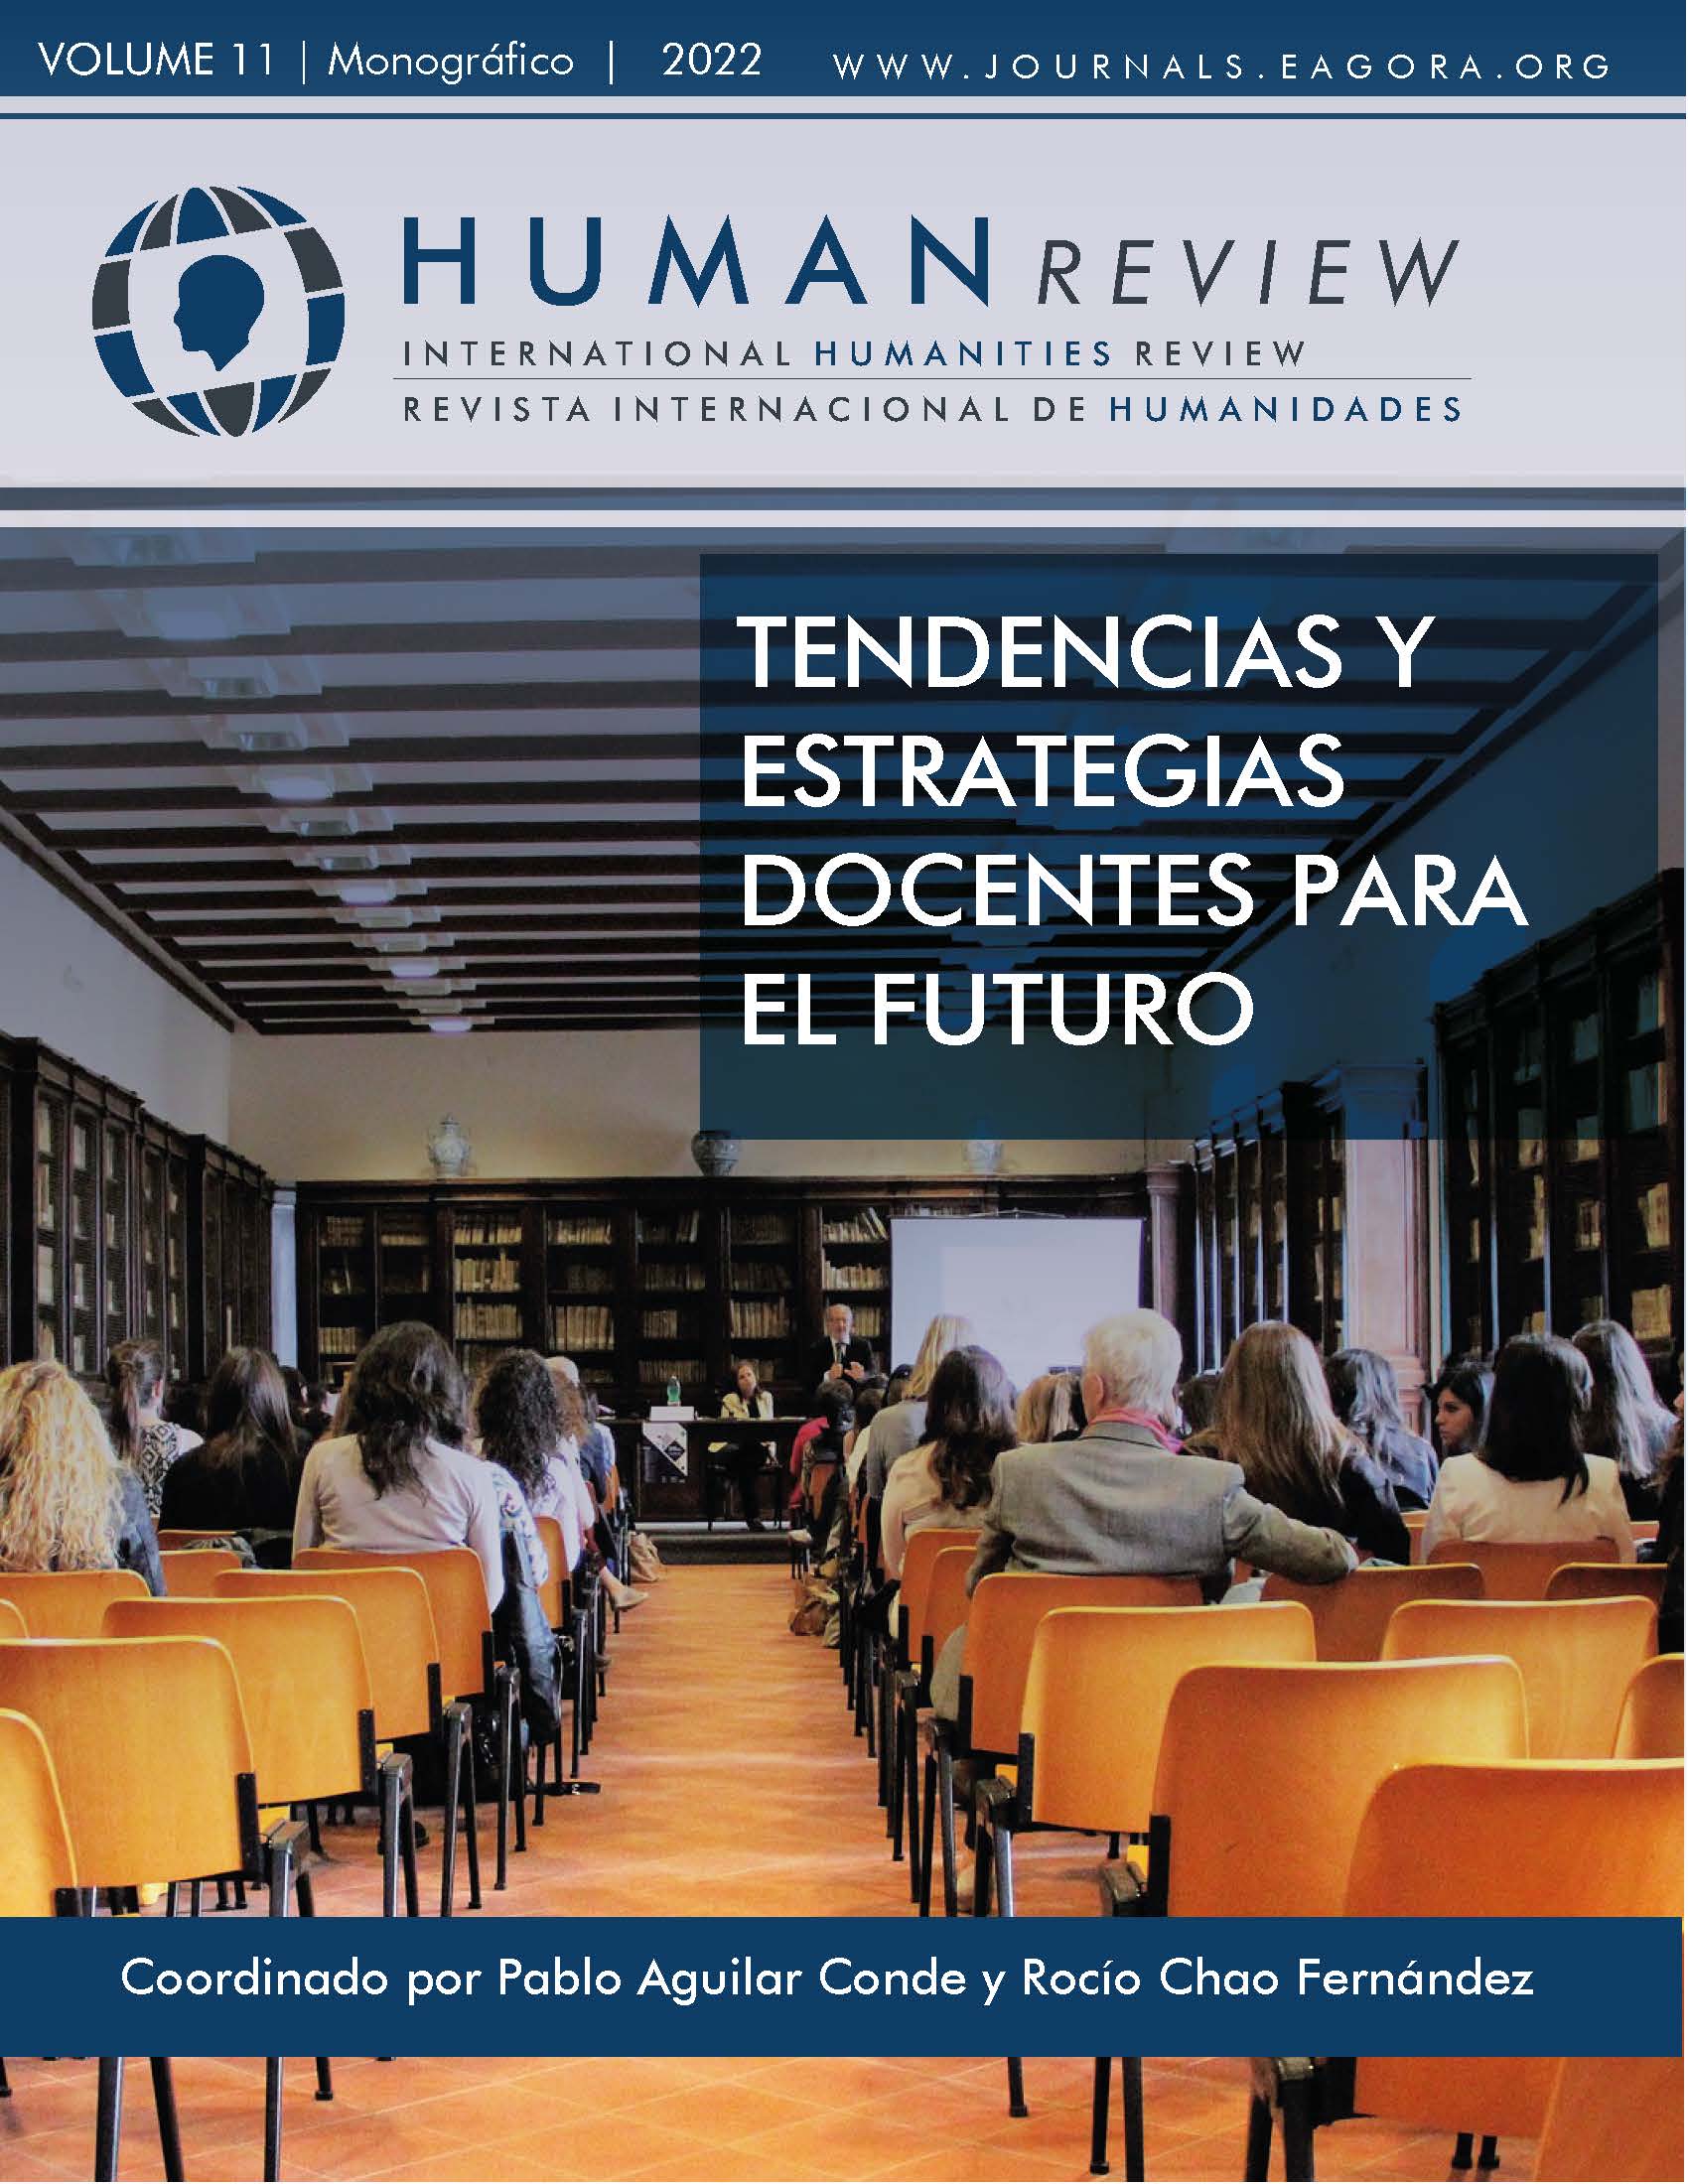 					View Vol. 11 No. 6 (2022): Monograph: "Teaching Trends and Strategies for the Future"
				